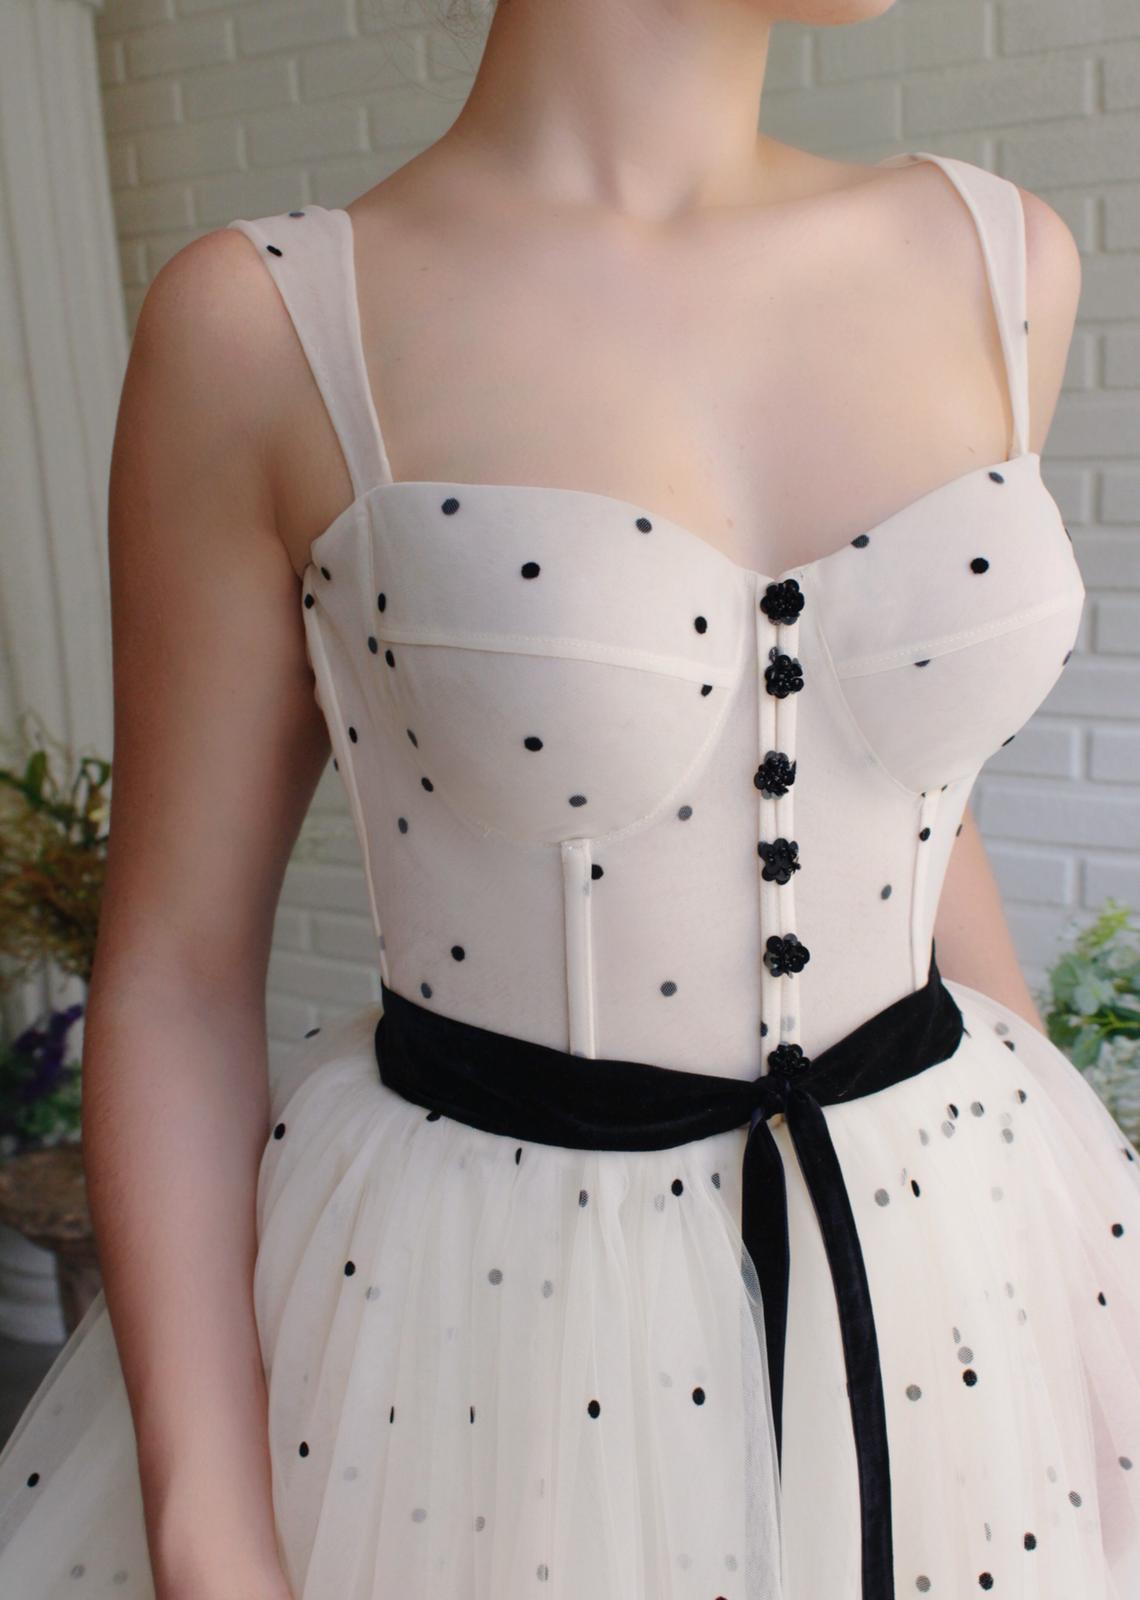 Beige A-Line dress with straps and dotted fabric